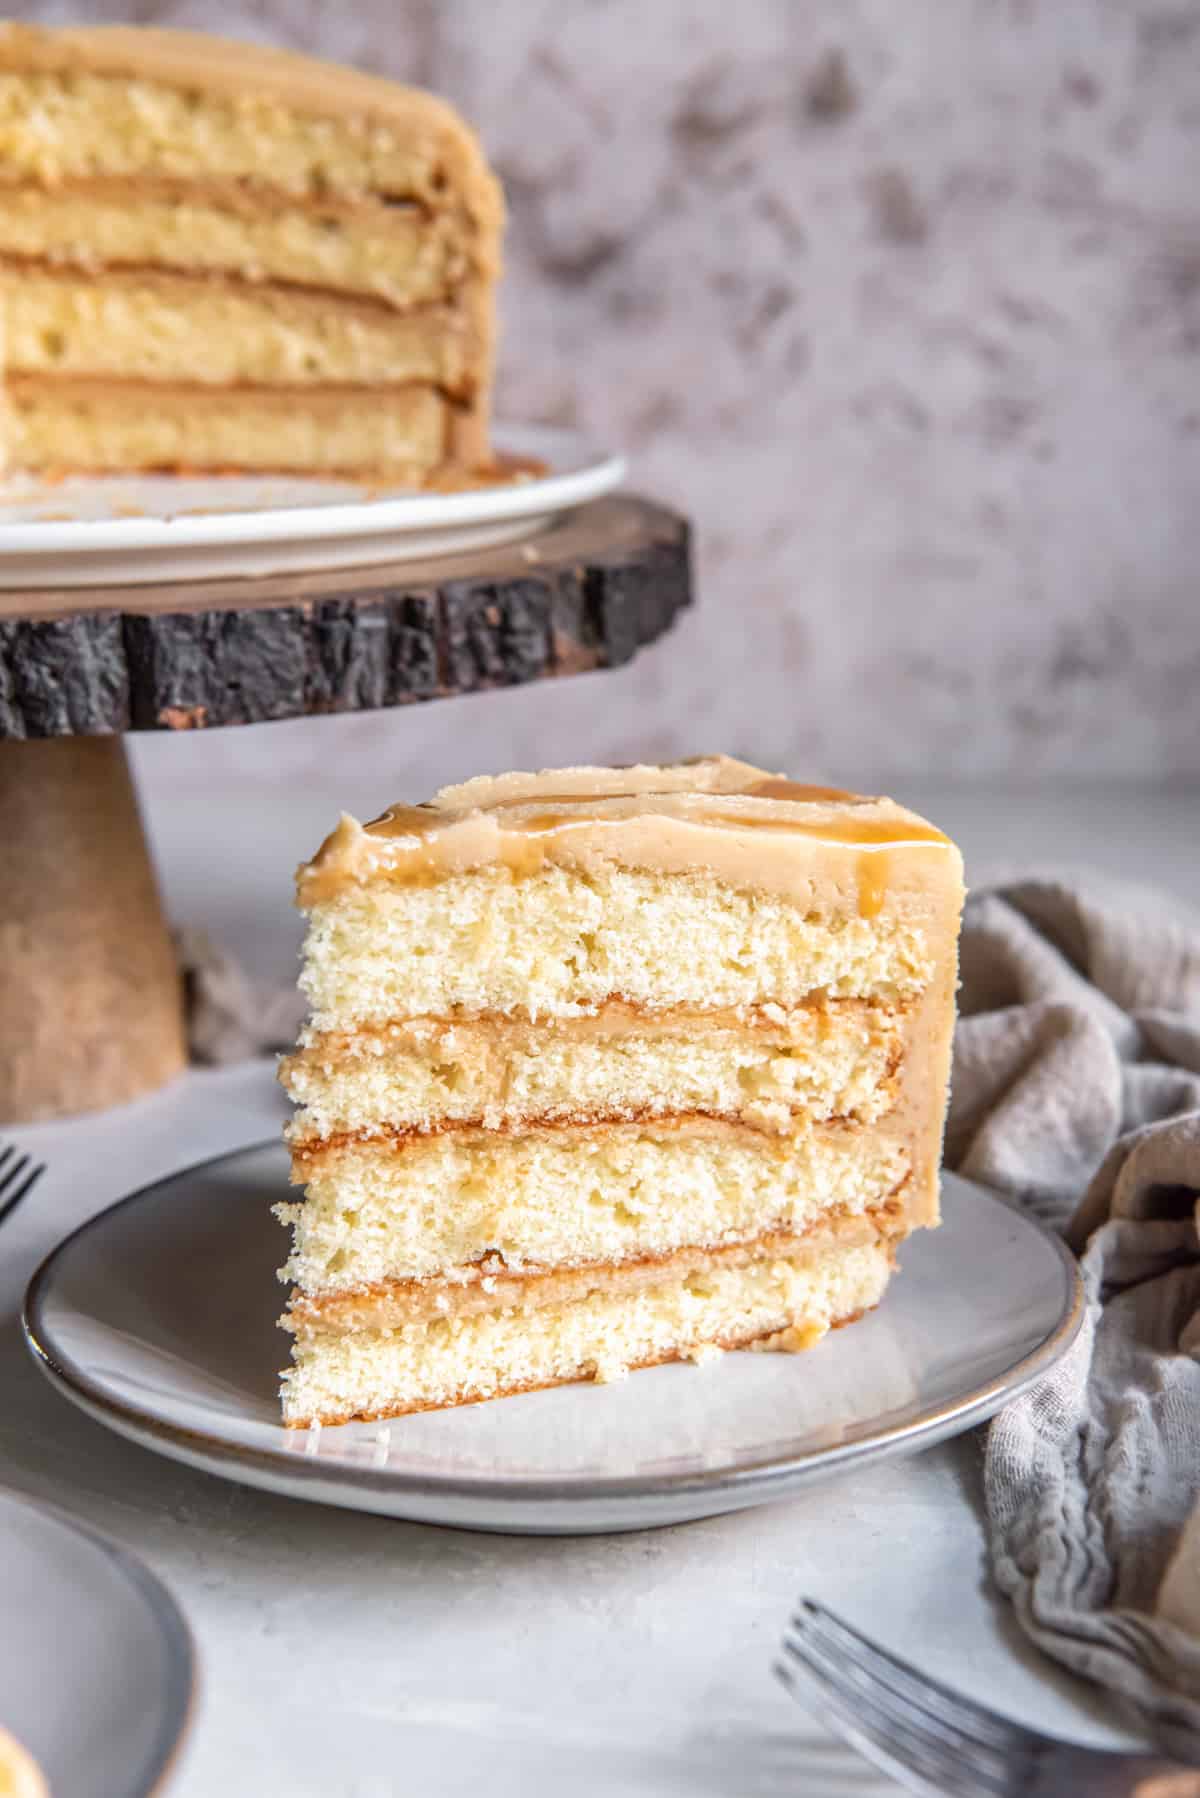 a slice of layered caramel cake on a plate, the rest of the cake is on a cake stand in the background